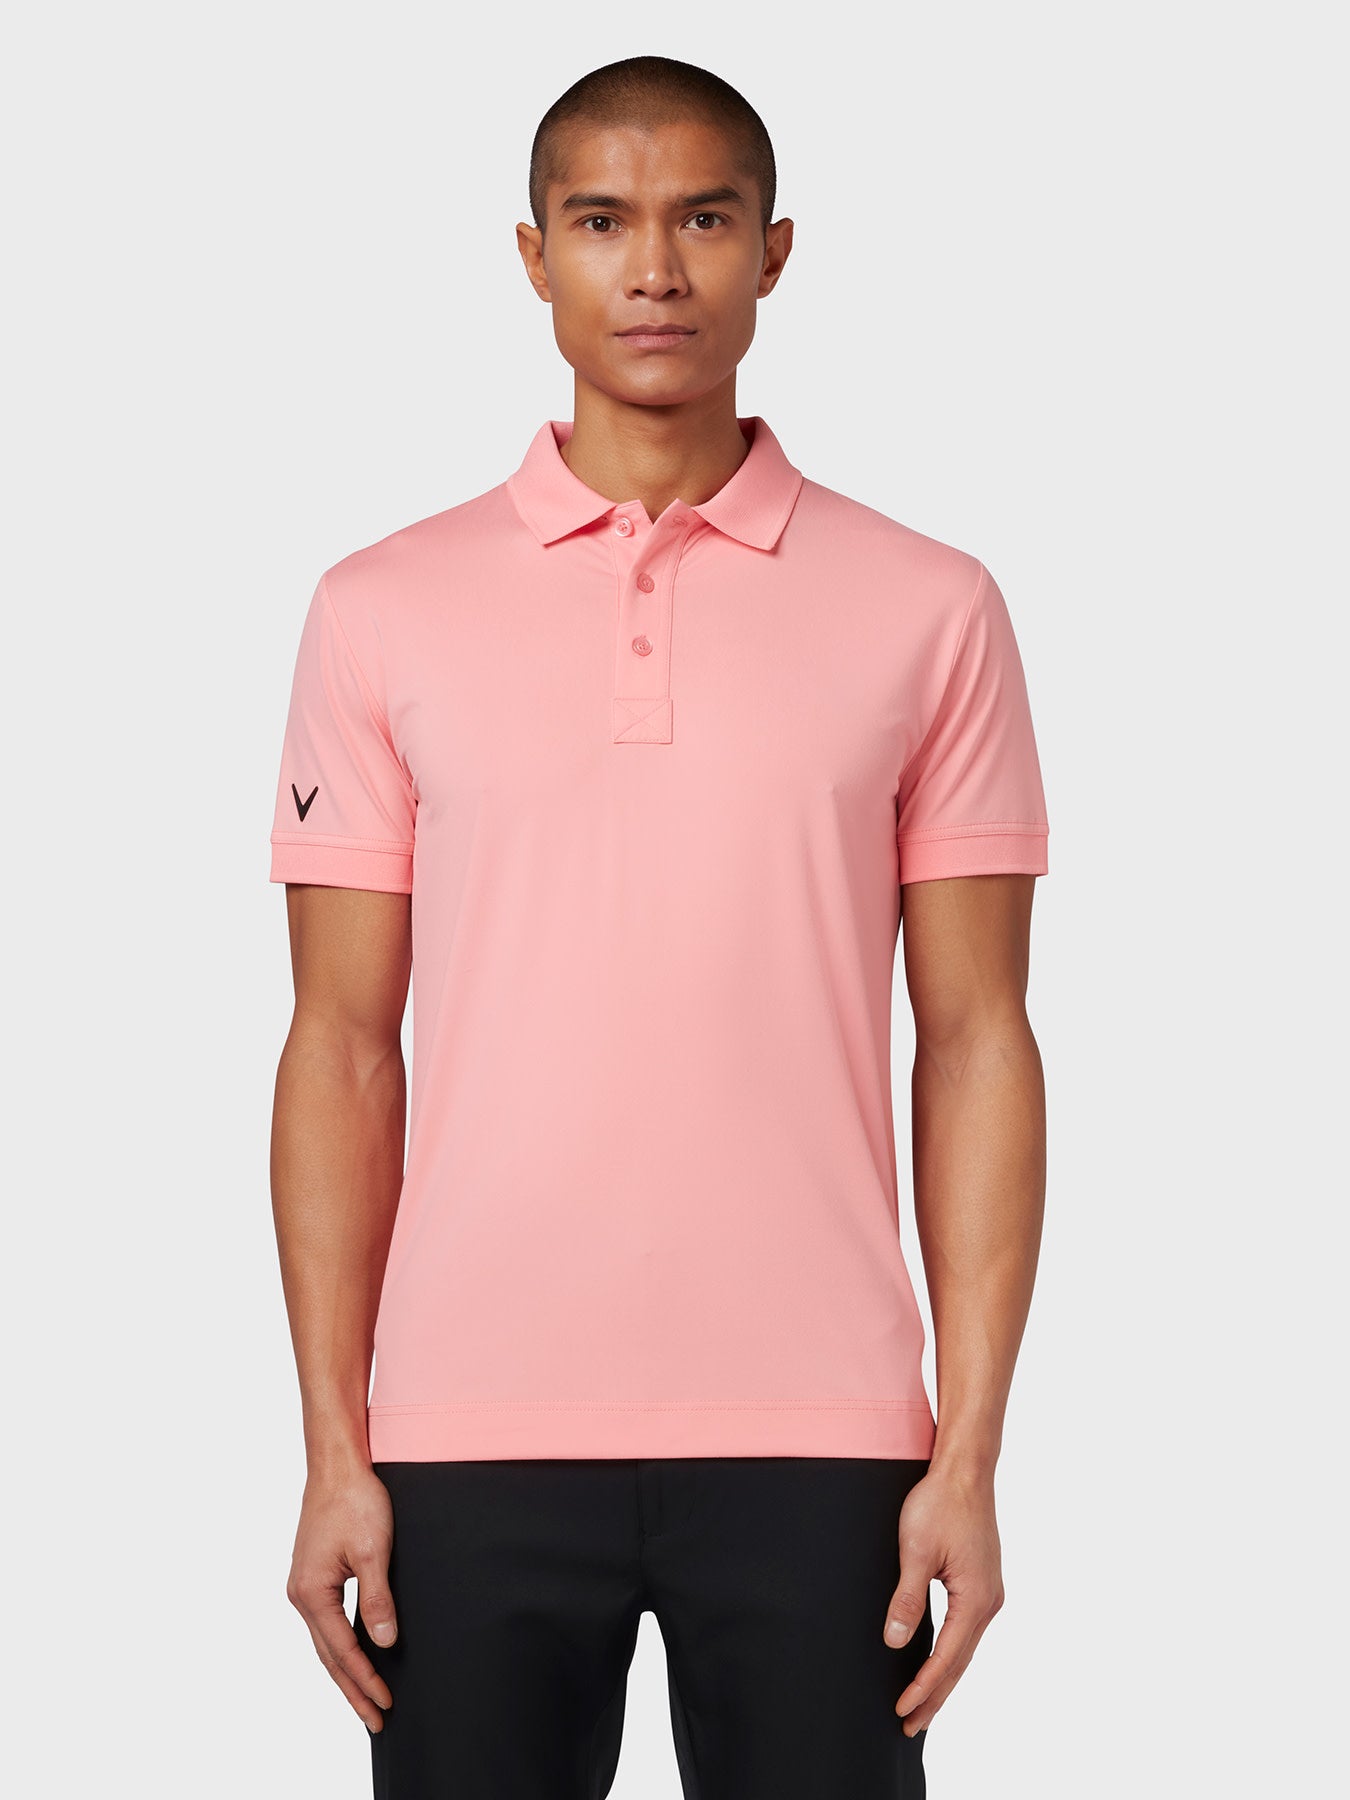 View X Series Solid Ribbed Polo In Geranium Pink Geranium Pink XXXL information